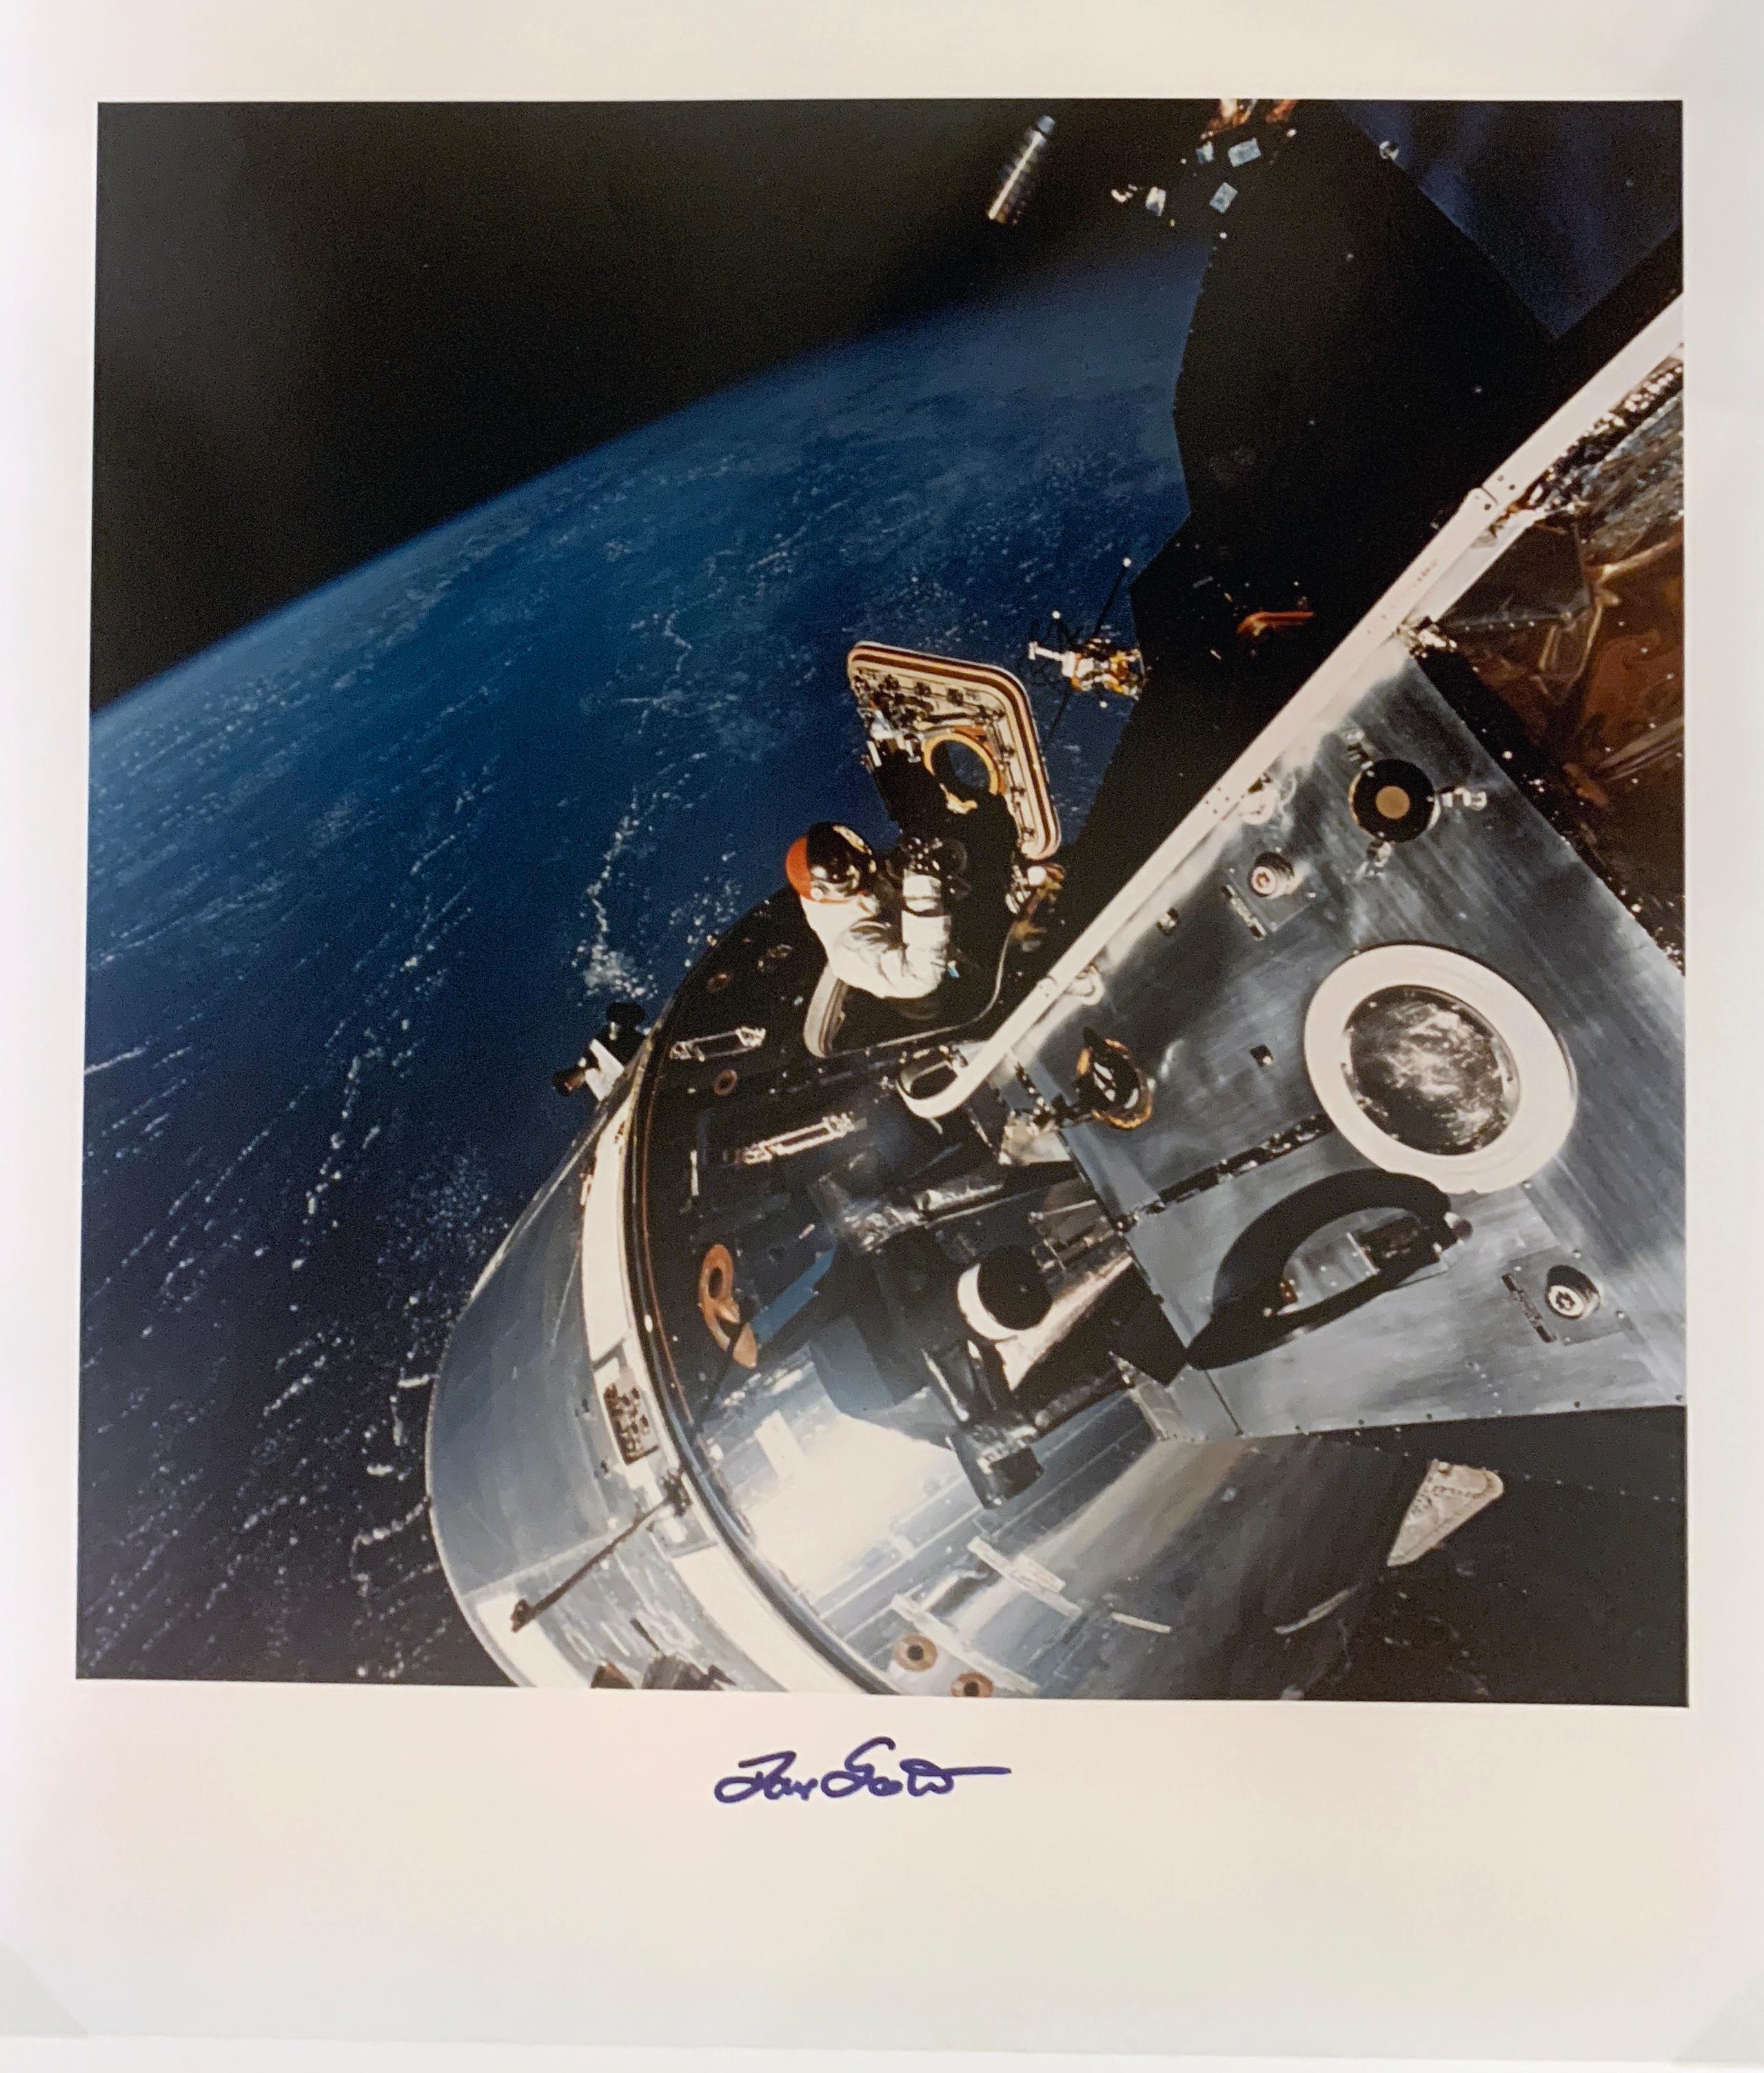 Seen from the docked Lunar Module Spider, astronaut David Scott stands in an open hatch of the command module Gumdrop in space. The third mission in NASA’s Apollo program, Apollo 9 was launched on 3rd March 1969, carrying American astronauts James